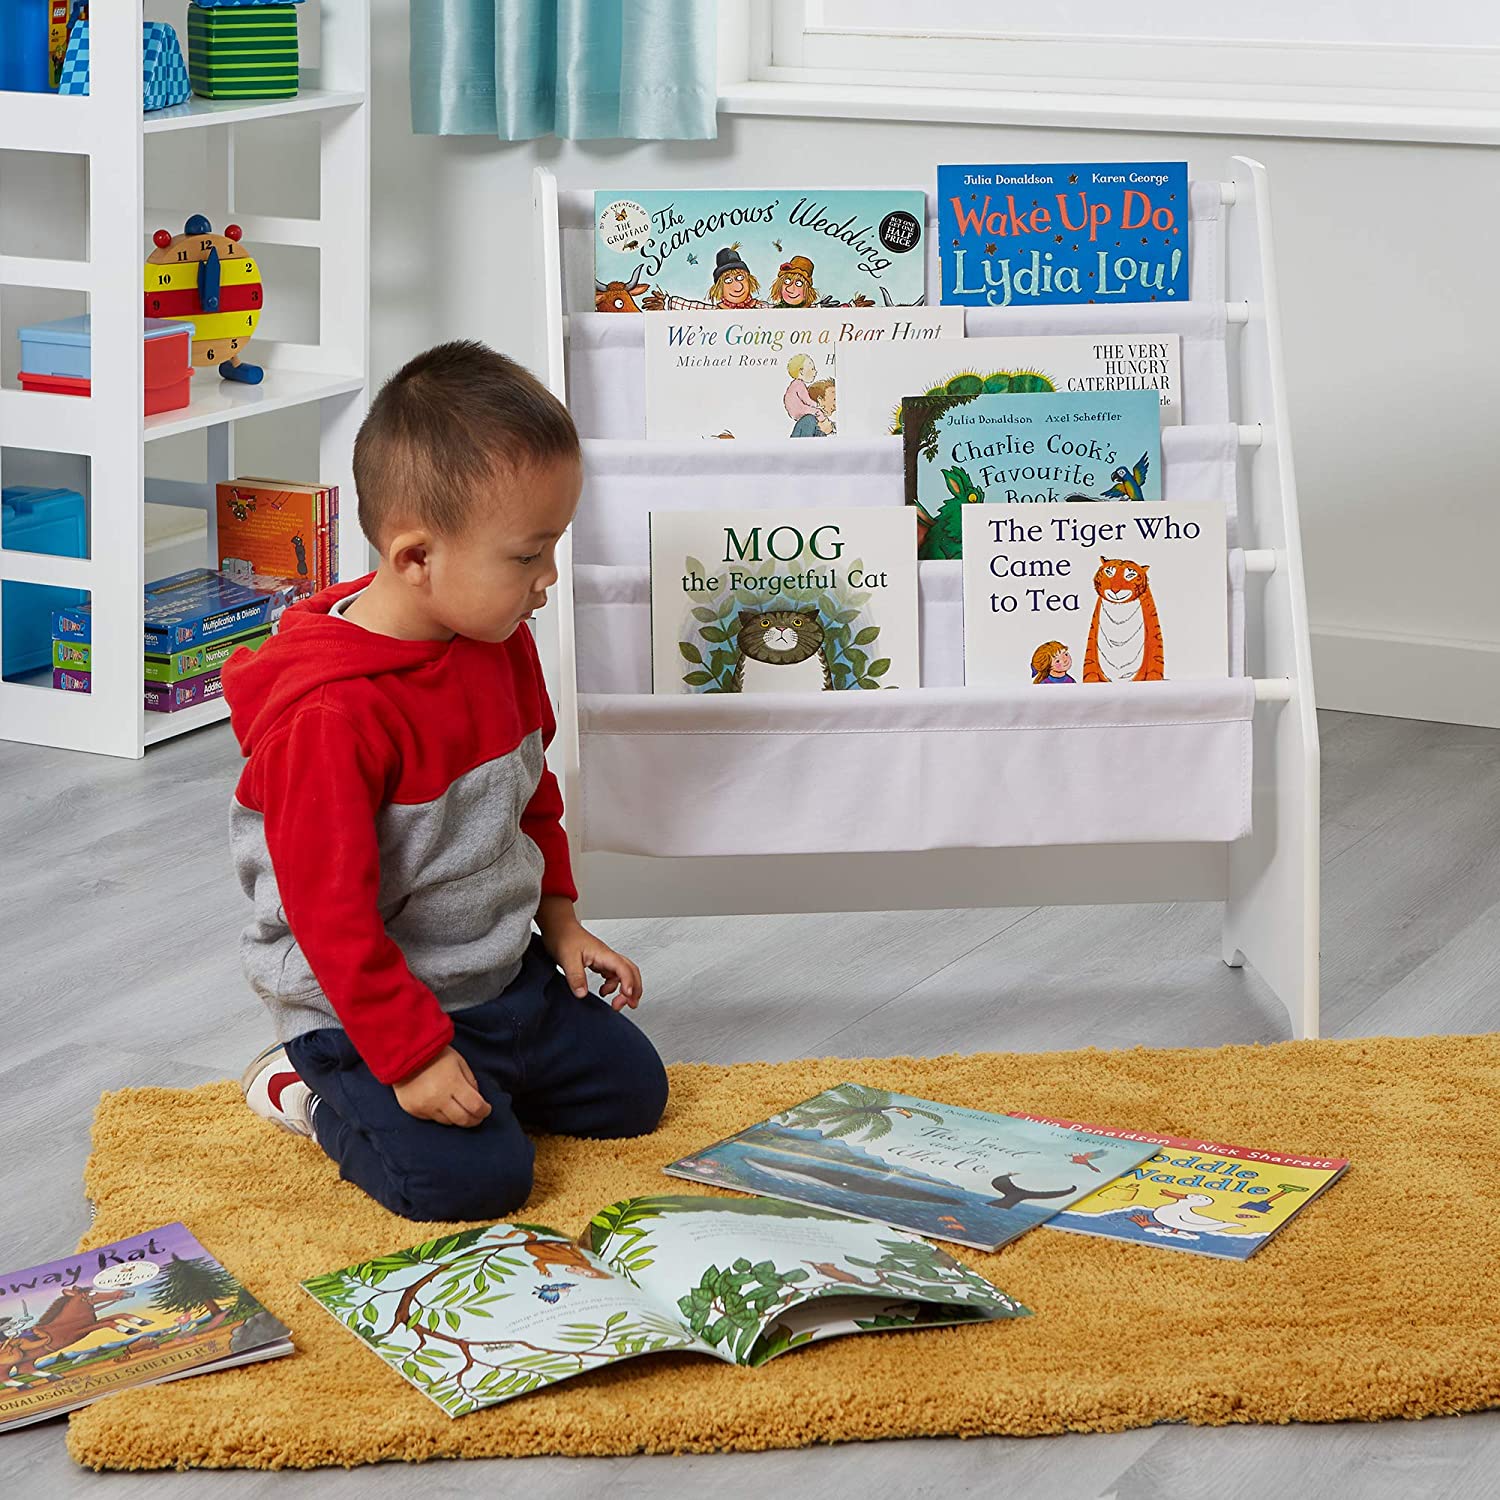 Sling Bookcase - White Book Display - Liberty House Toys - Junior Bambinos